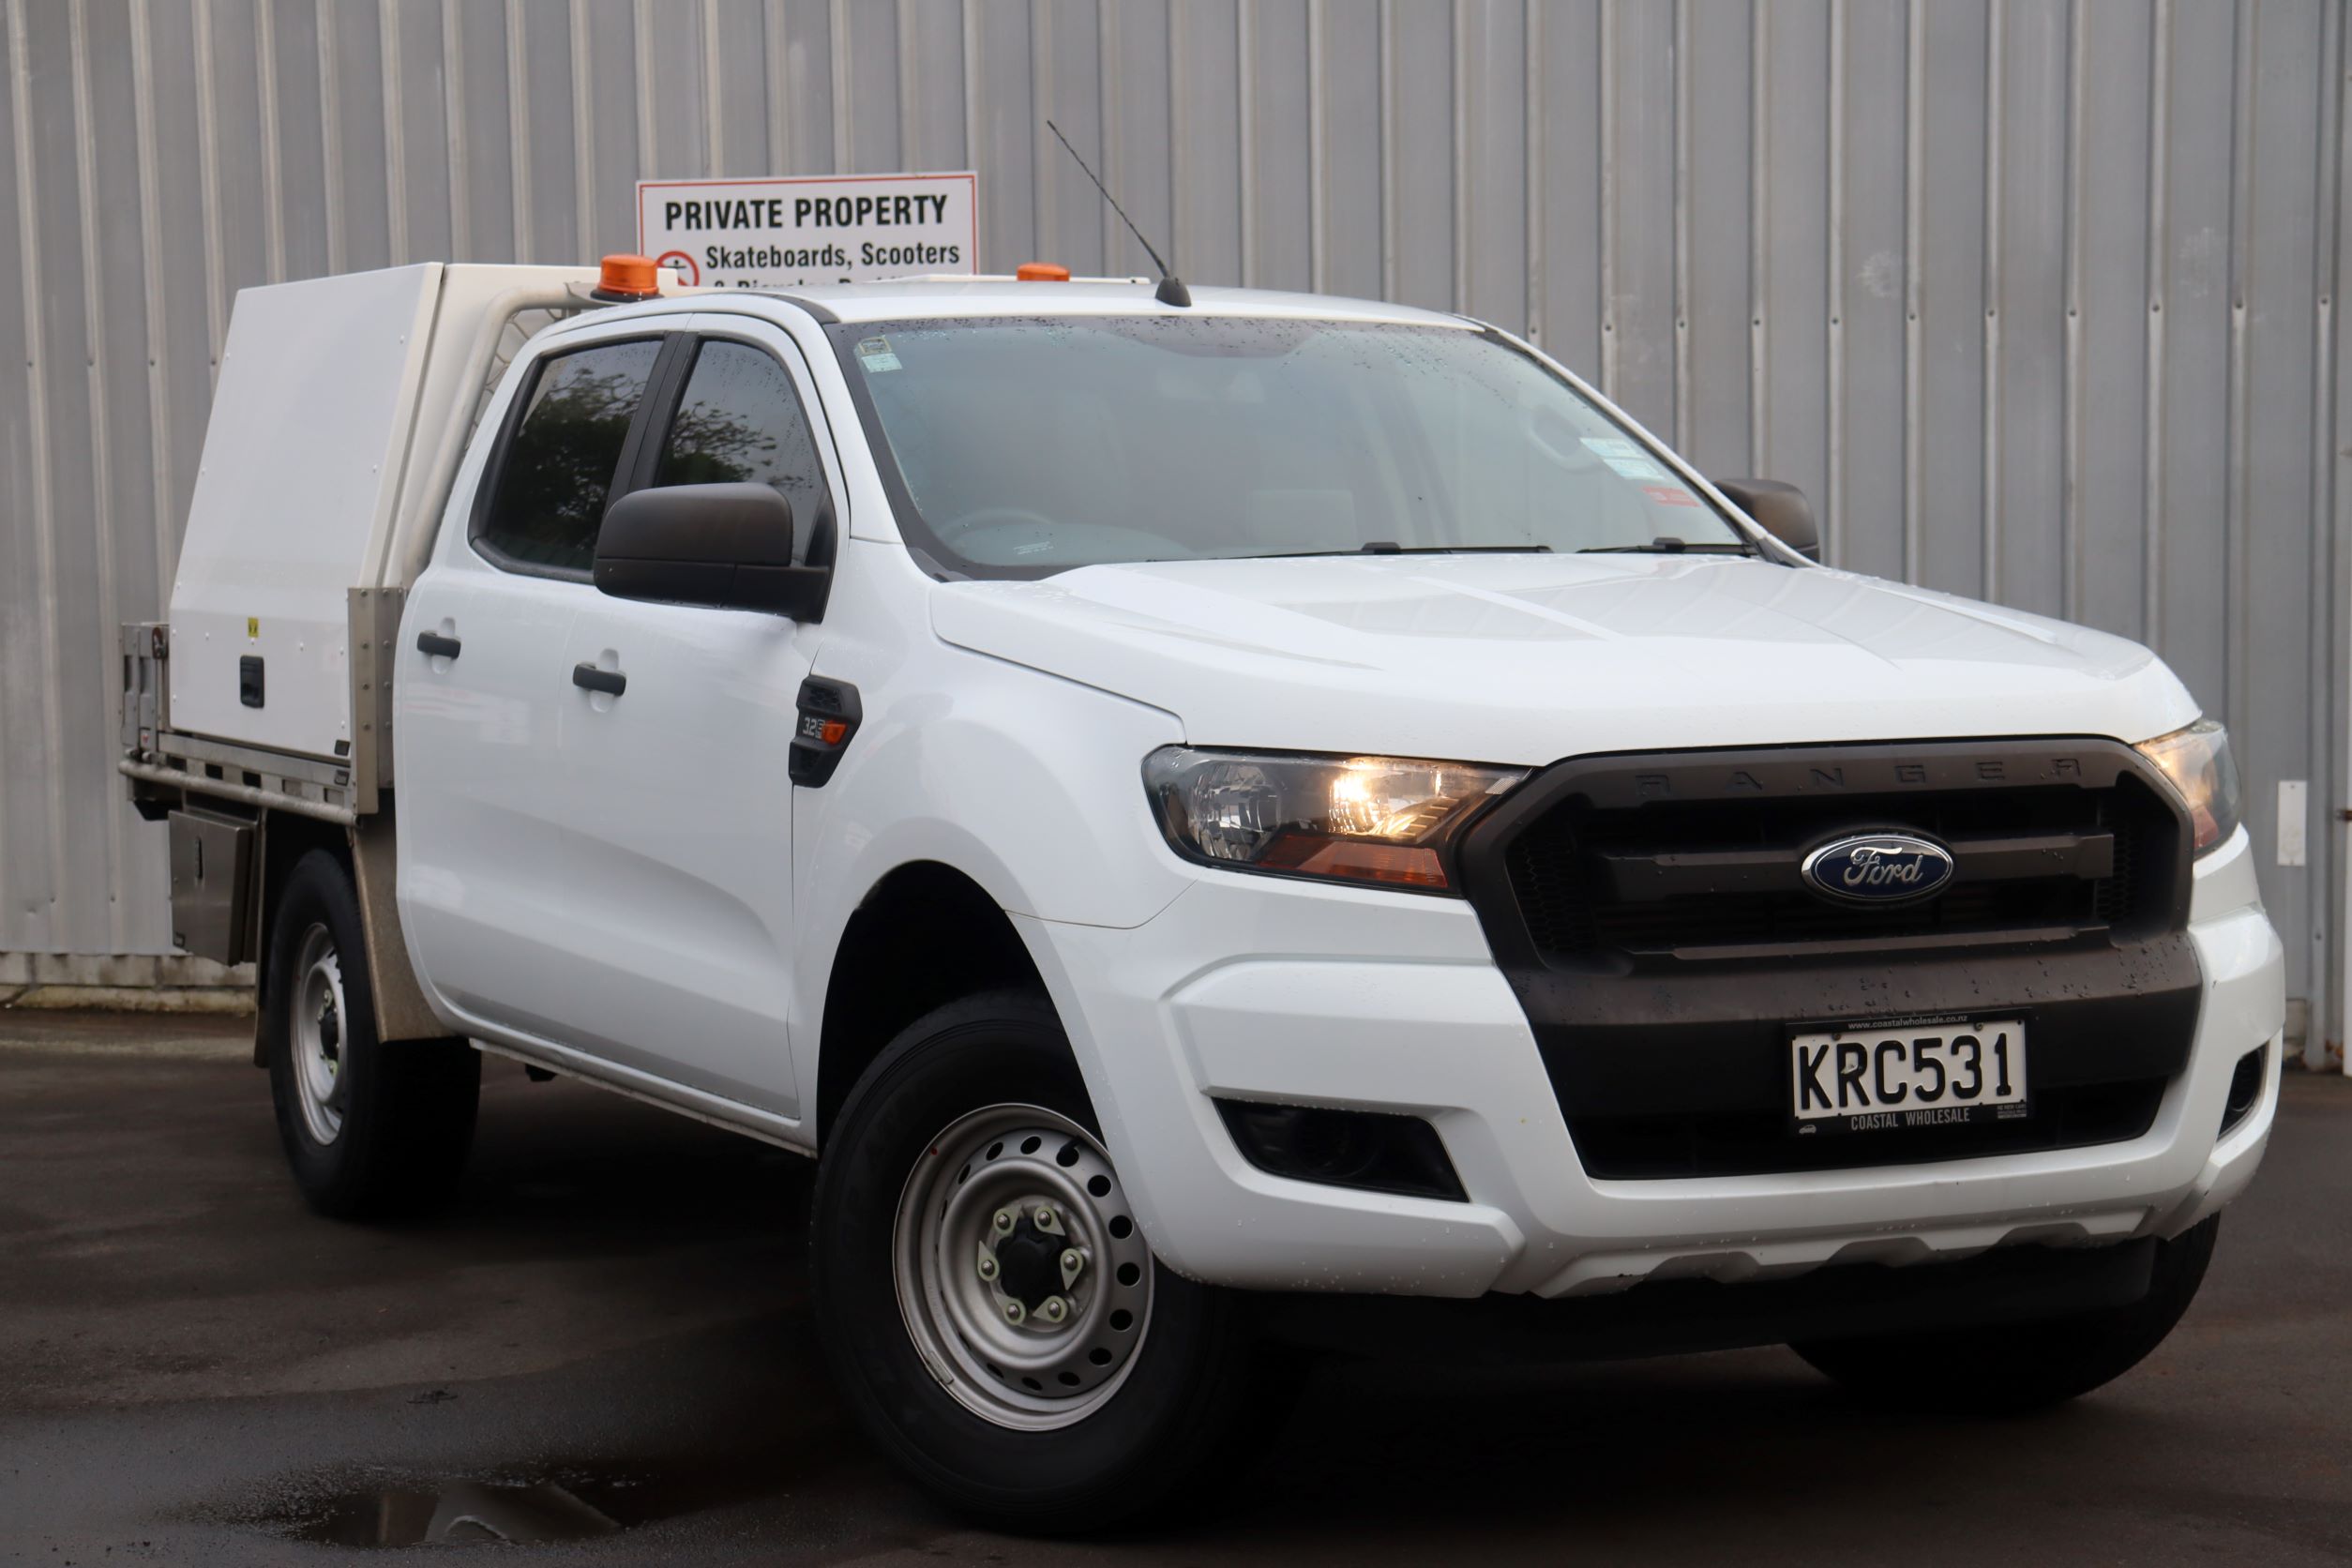 Ford RANGER DOUBLE CAB CAMCO SET UP 2017 for sale in Auckland